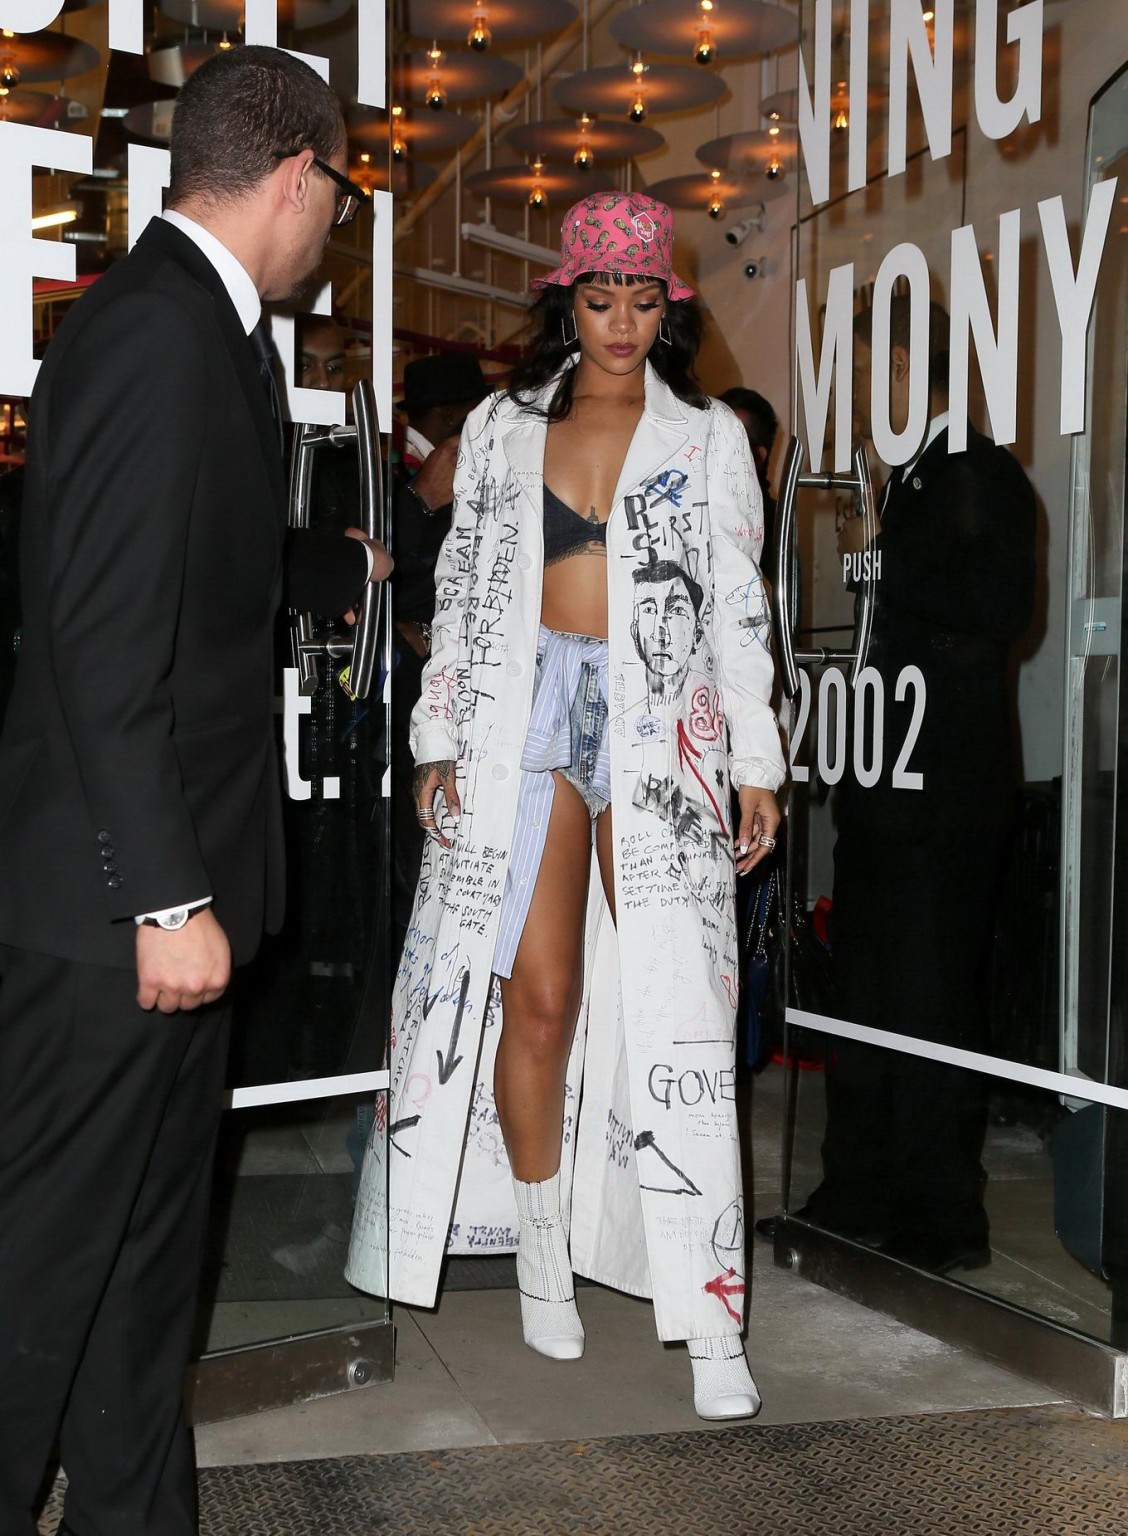 Rihanna wearing bra and denim shorts at her fashion line launch in NYC #75168311